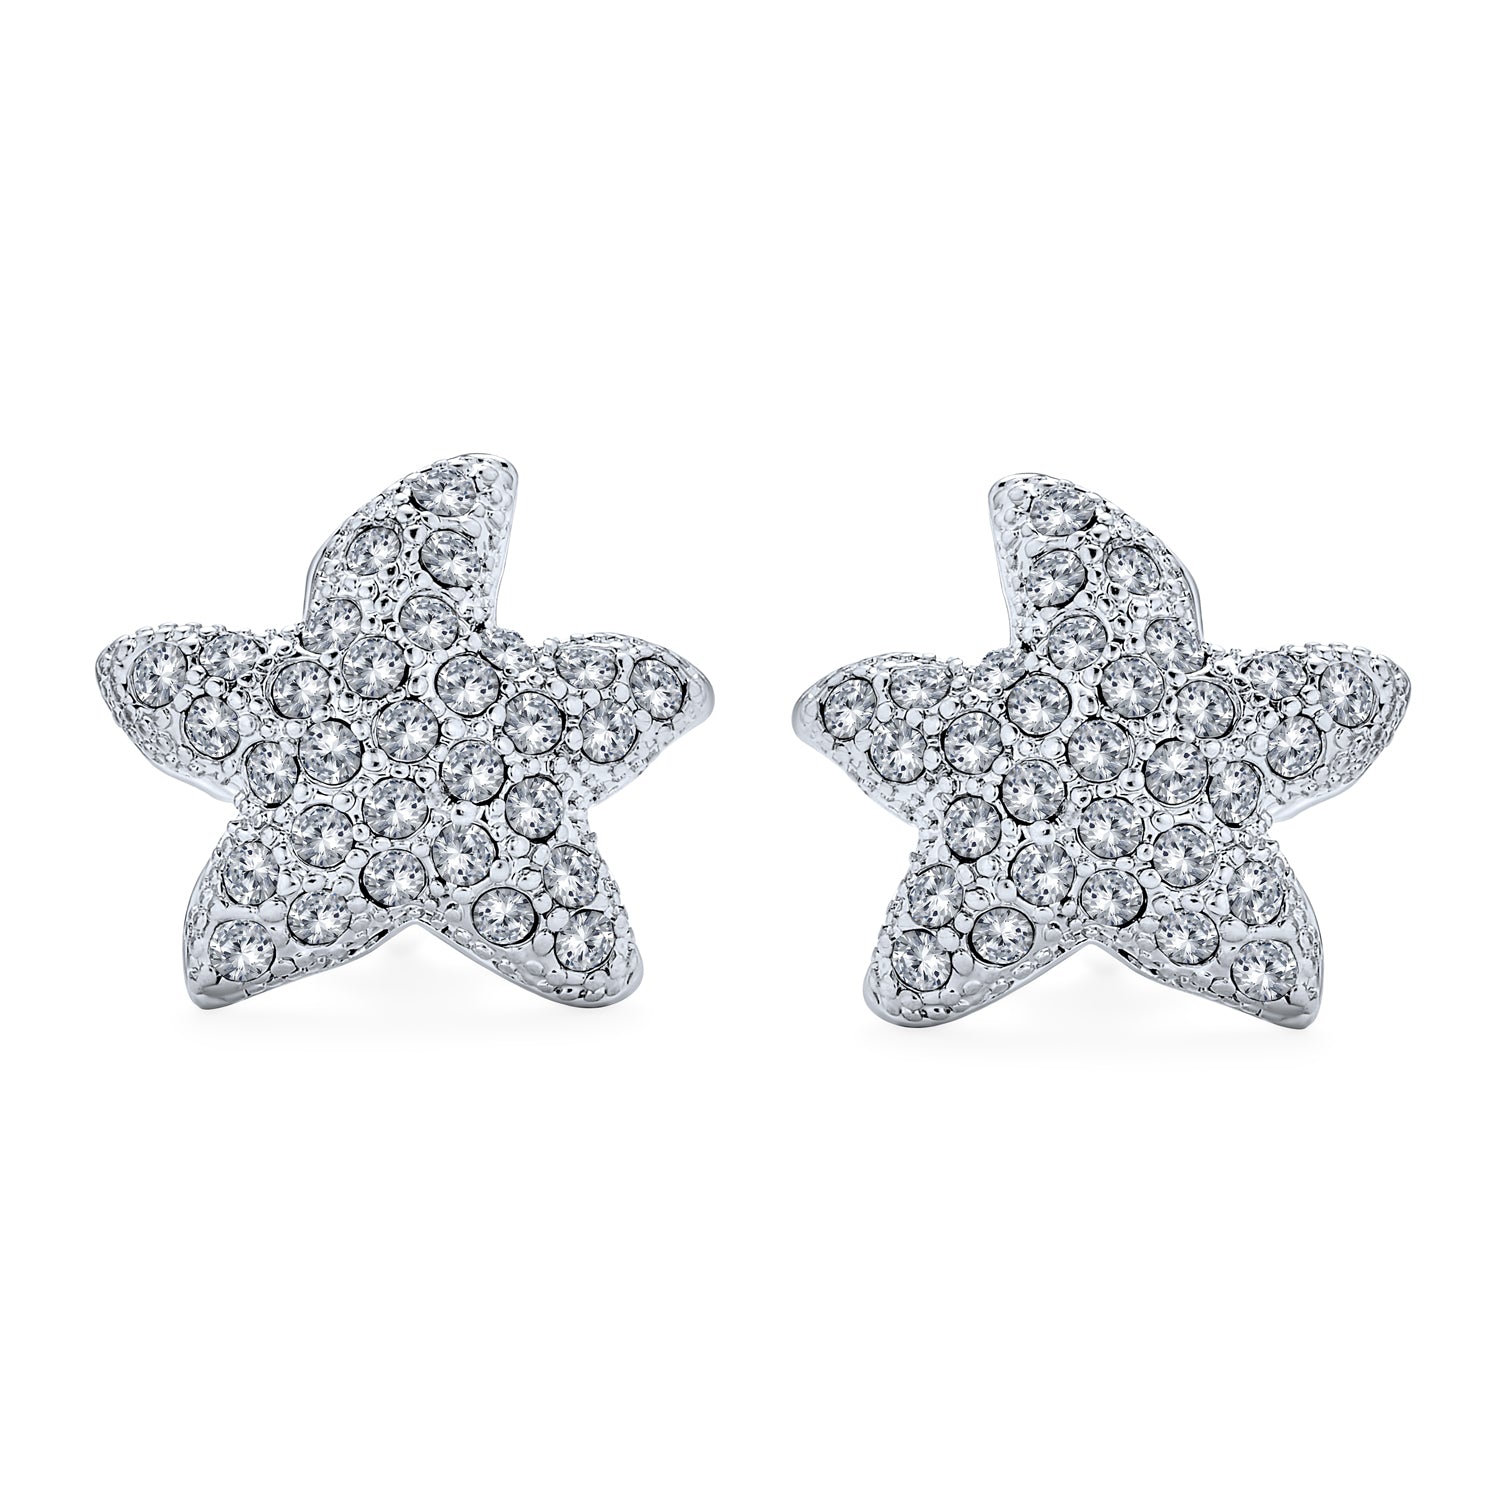 Pave Crystal Starfish Clip On Earrings Non Pierced Ears Silver Plated ...